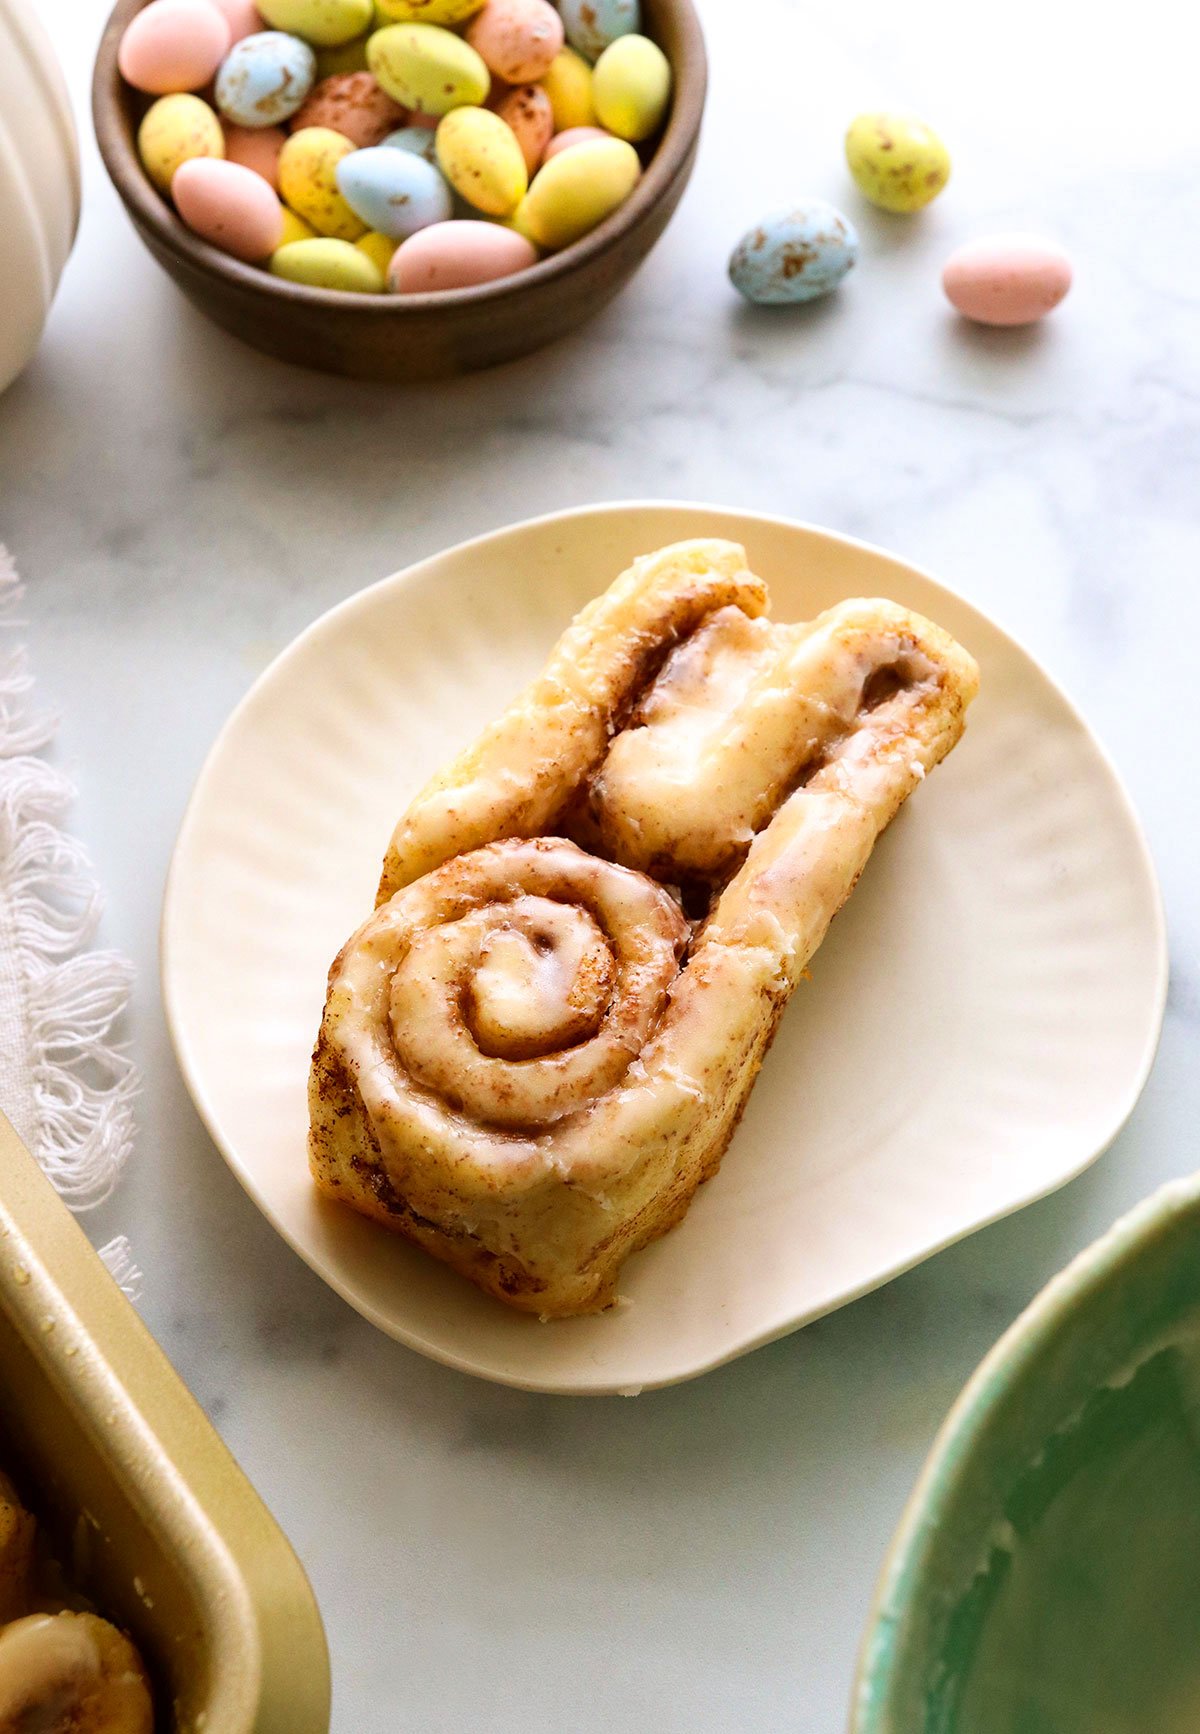 bunny cinnamon roll on a white plate.